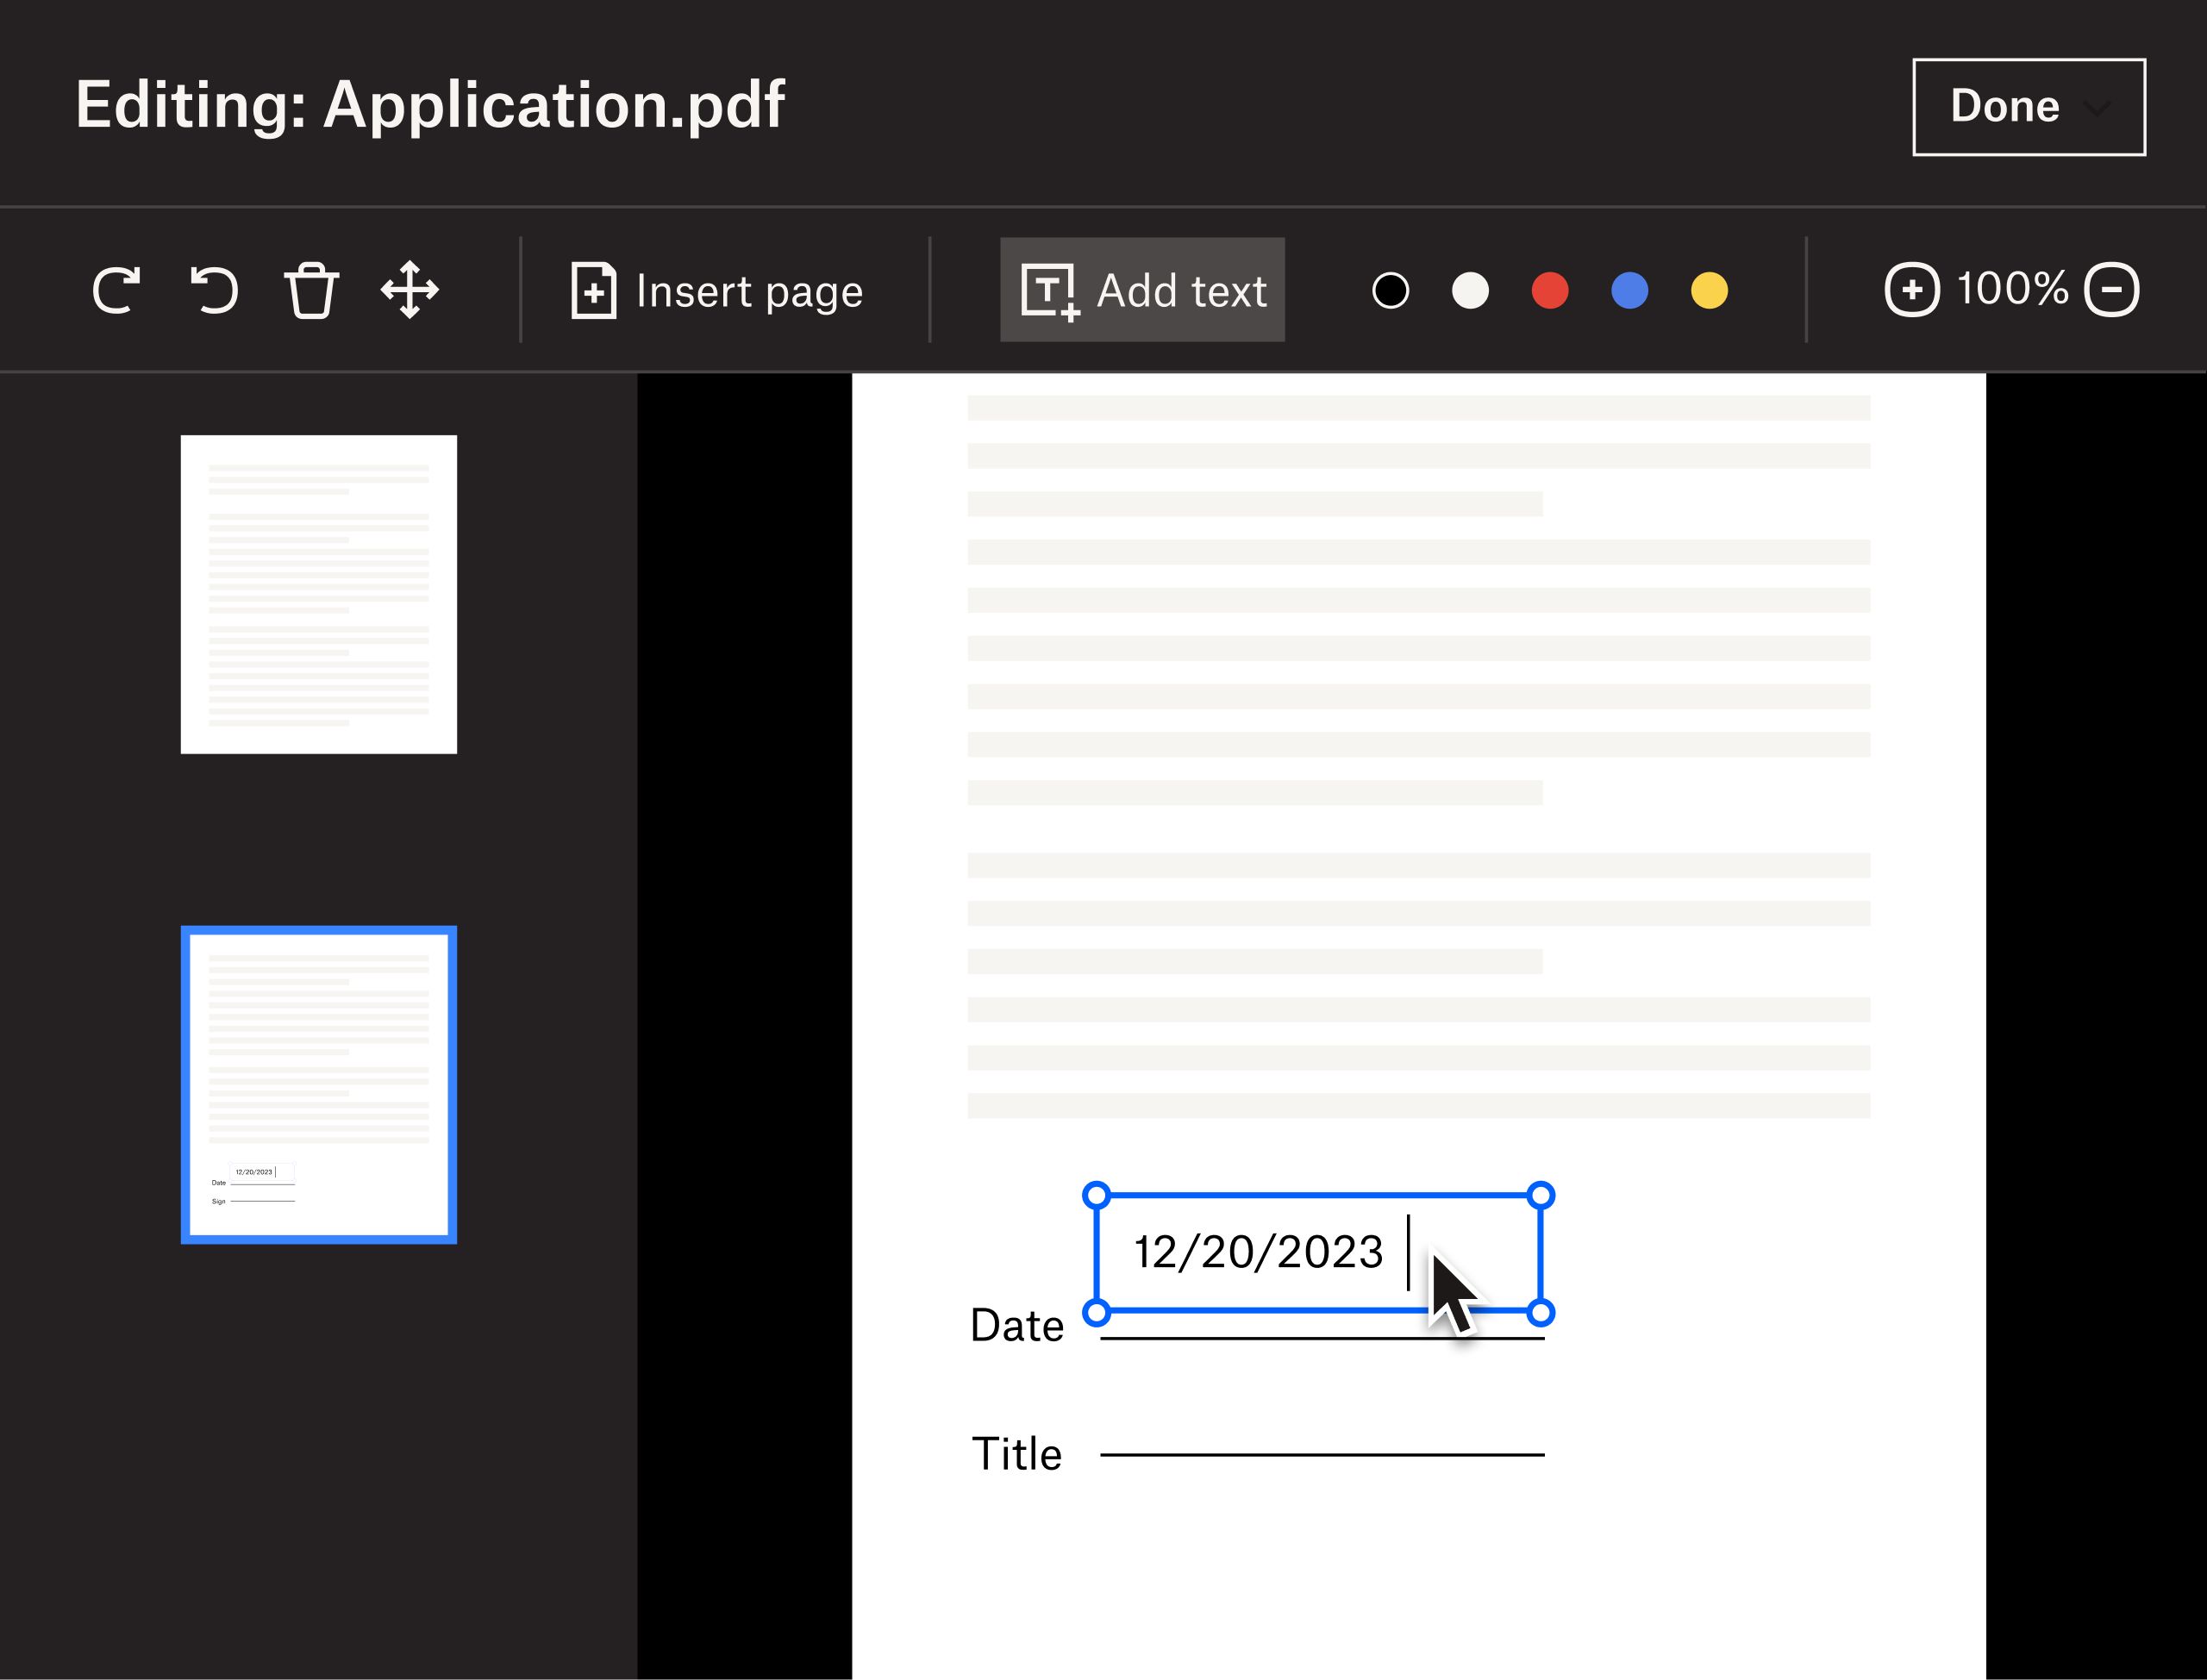 Image demonstrating how to add text to a PDF using Dropbox.